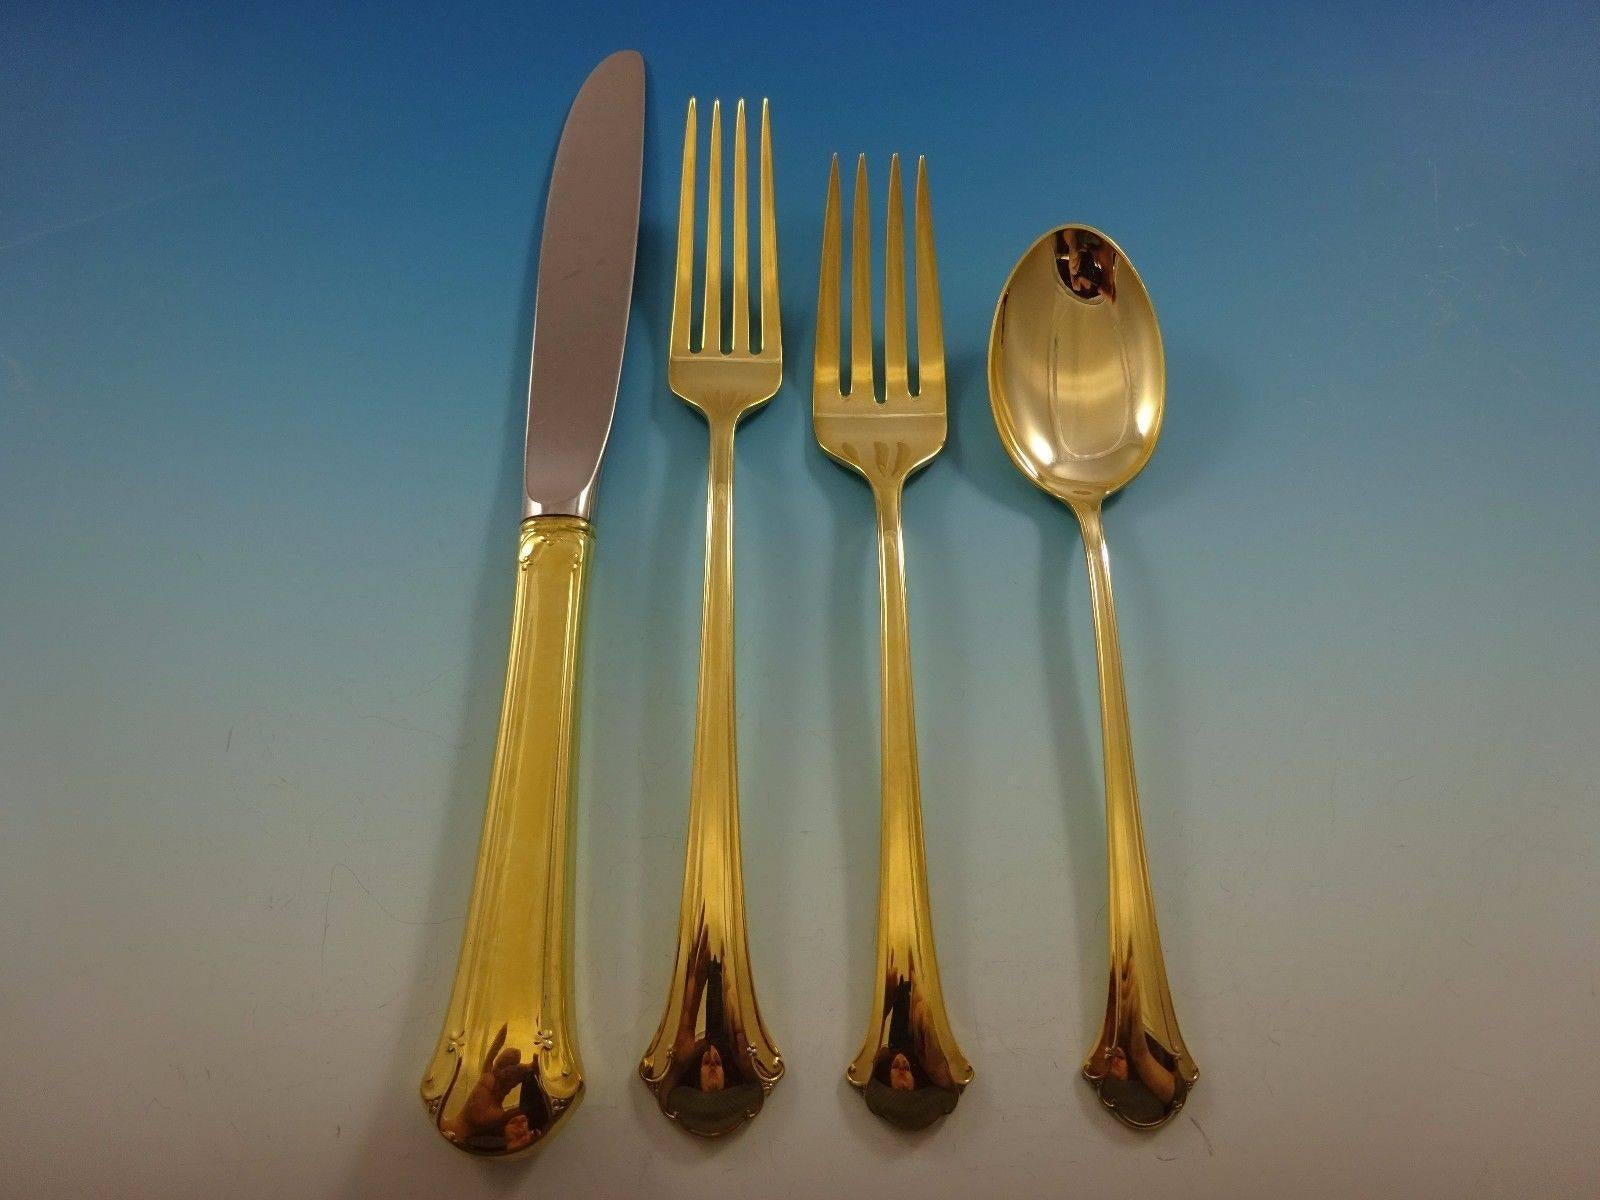 Chippendale gold by Towle sterling silver flatware set - 24 pieces. Gold flatware is on trend and makes a bold statement on your table. This set is vermeil (completely gold-washed) and includes: 

six knives, 8 7/8